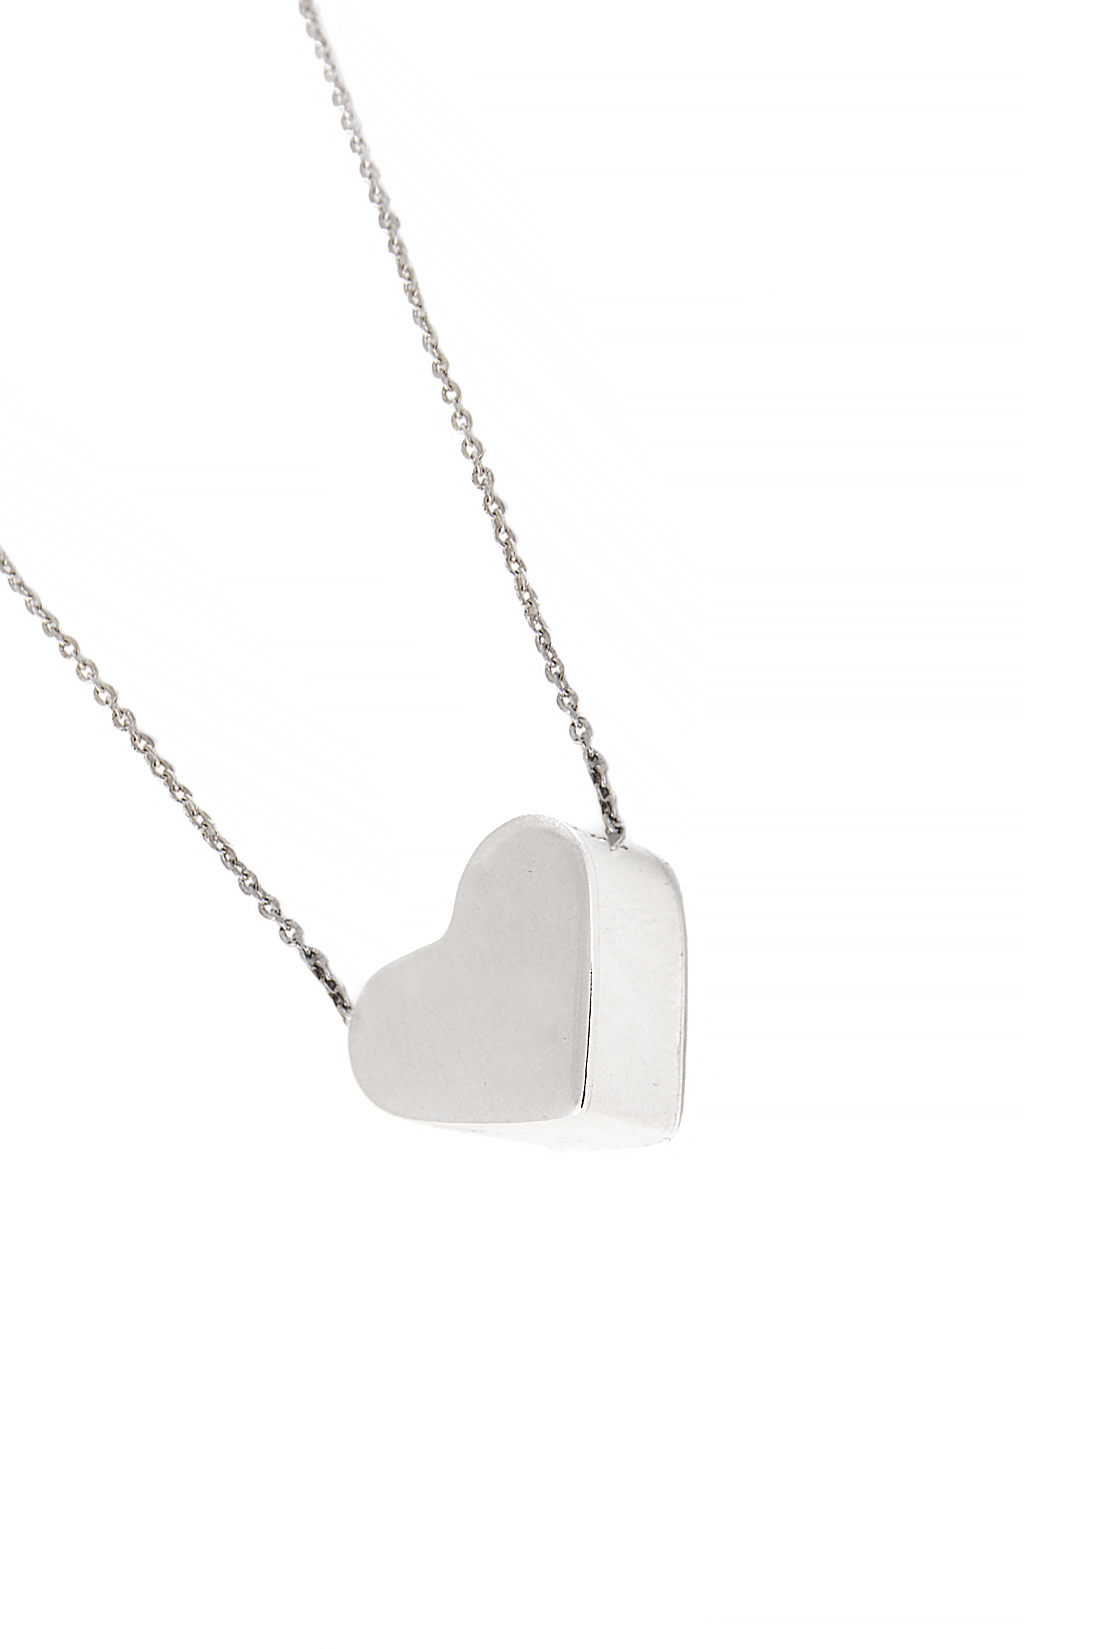 'Heart' silver necklace Snob. image 1